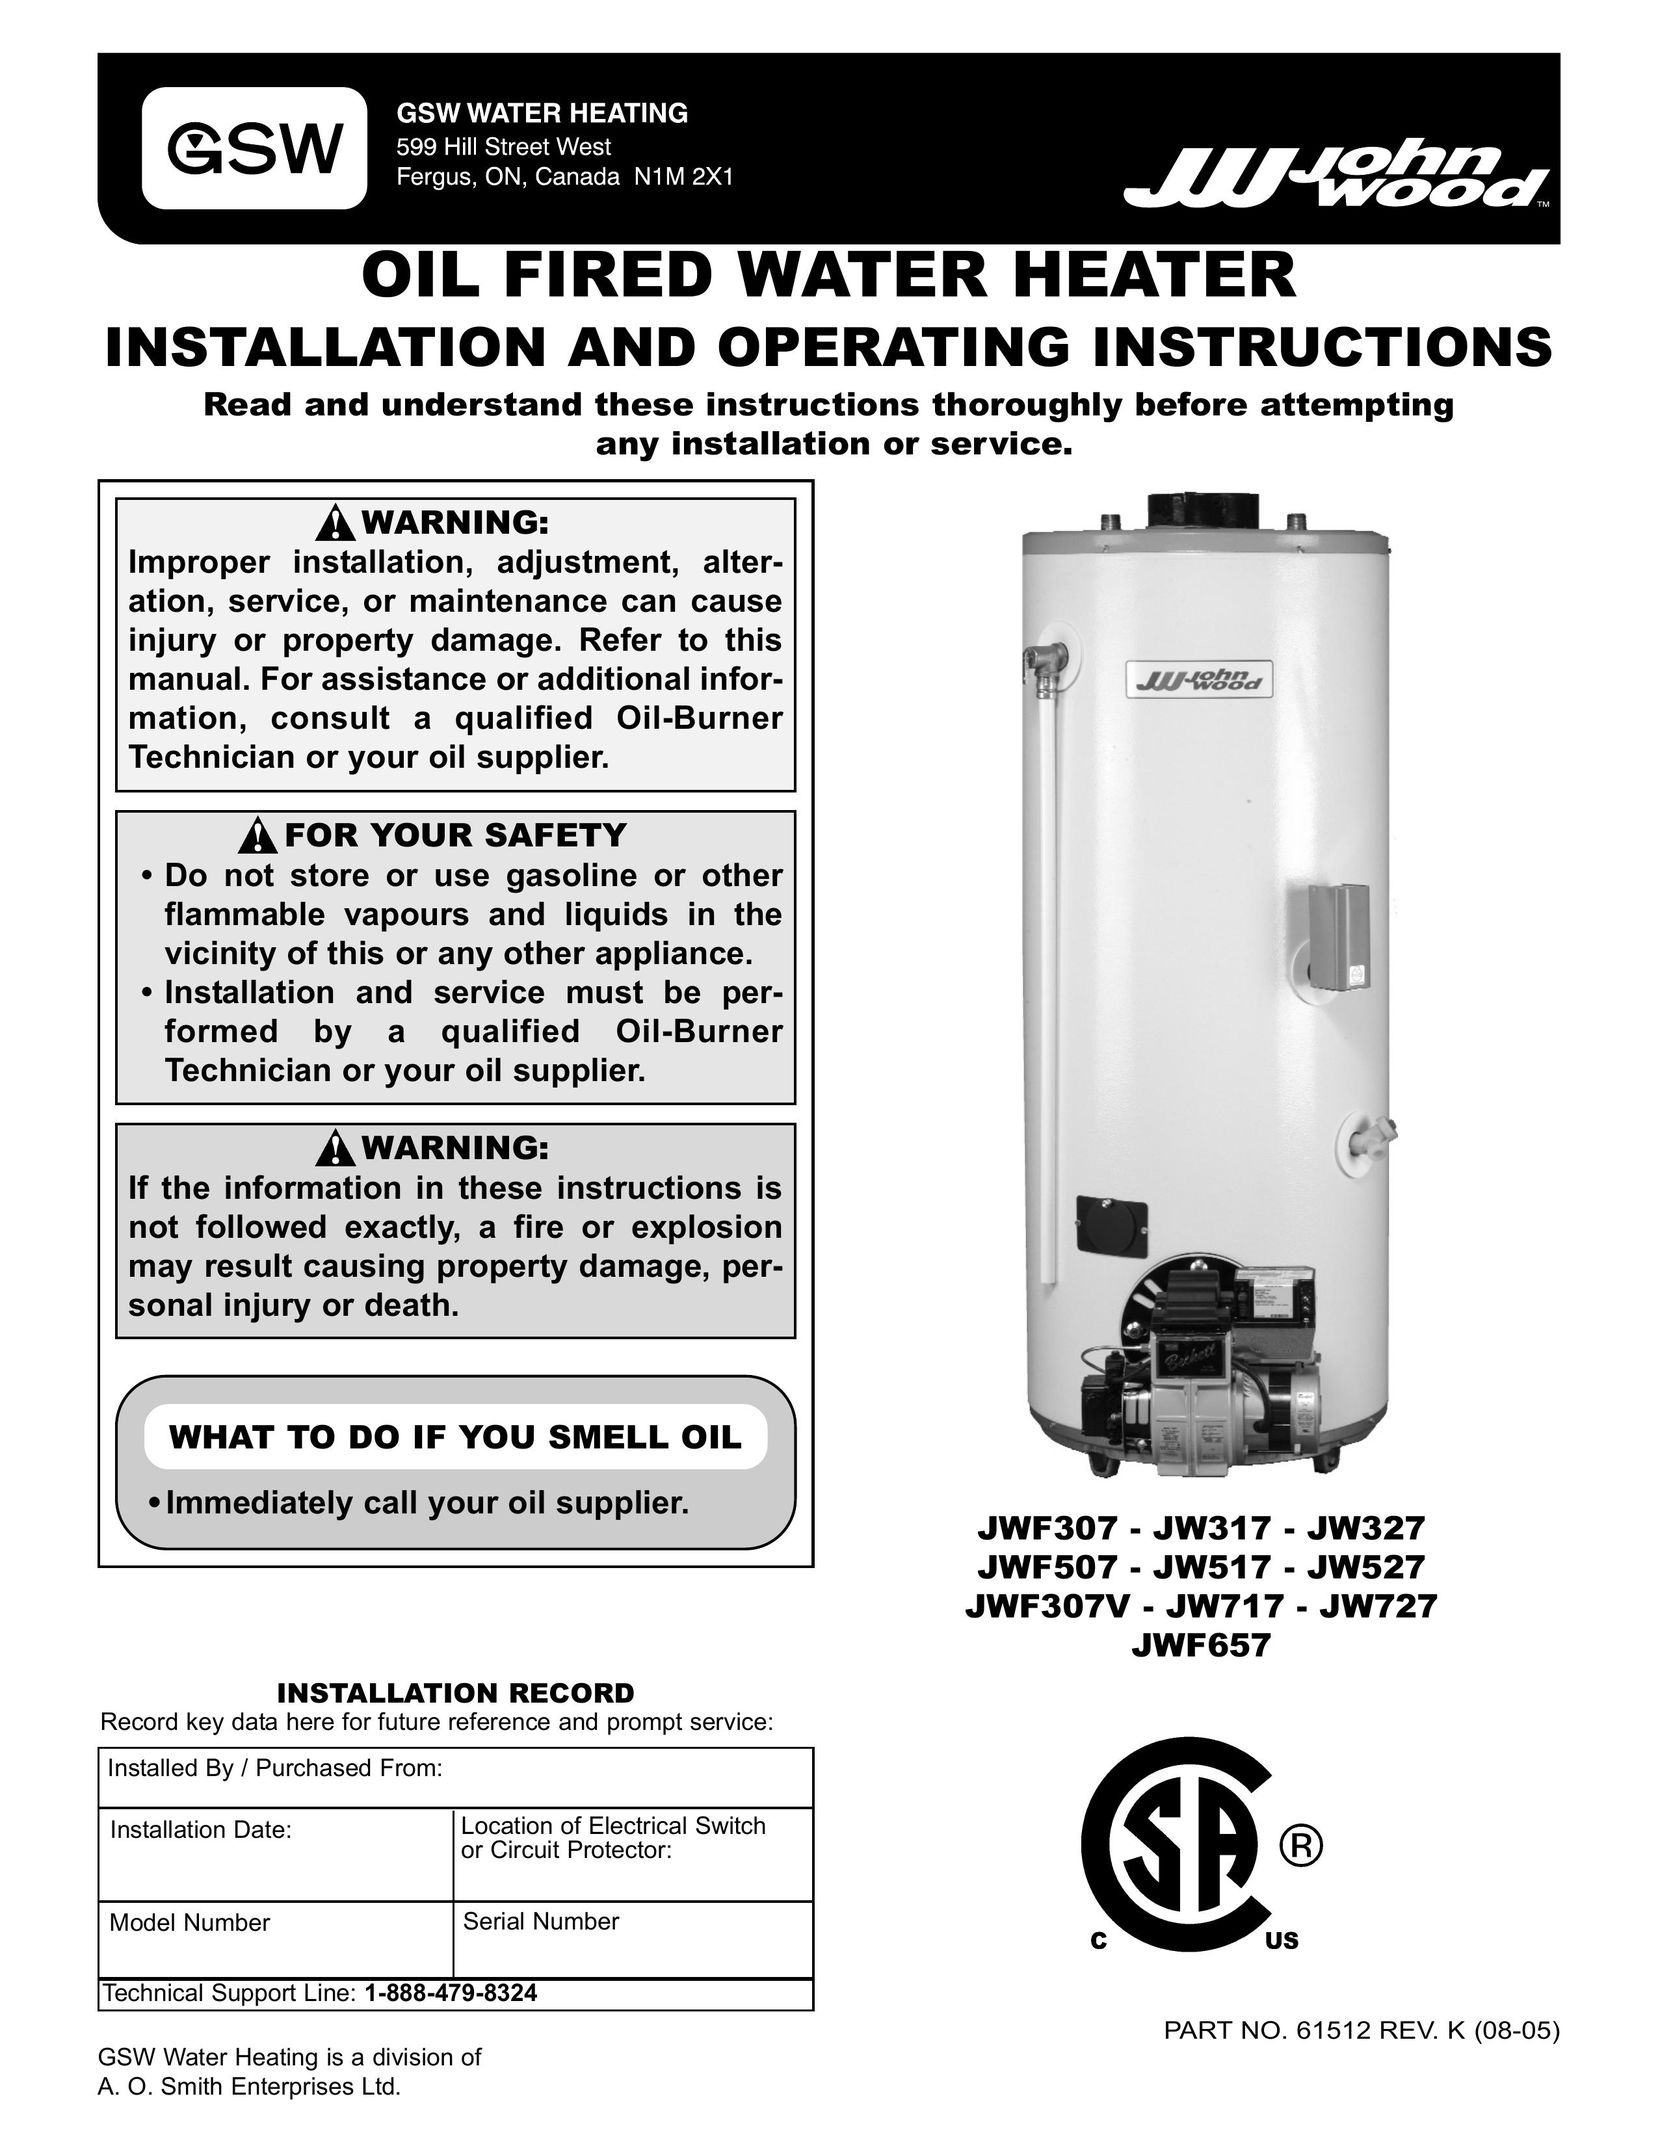 Smith Cast Iron Boilers JW327 Water Heater User Manual